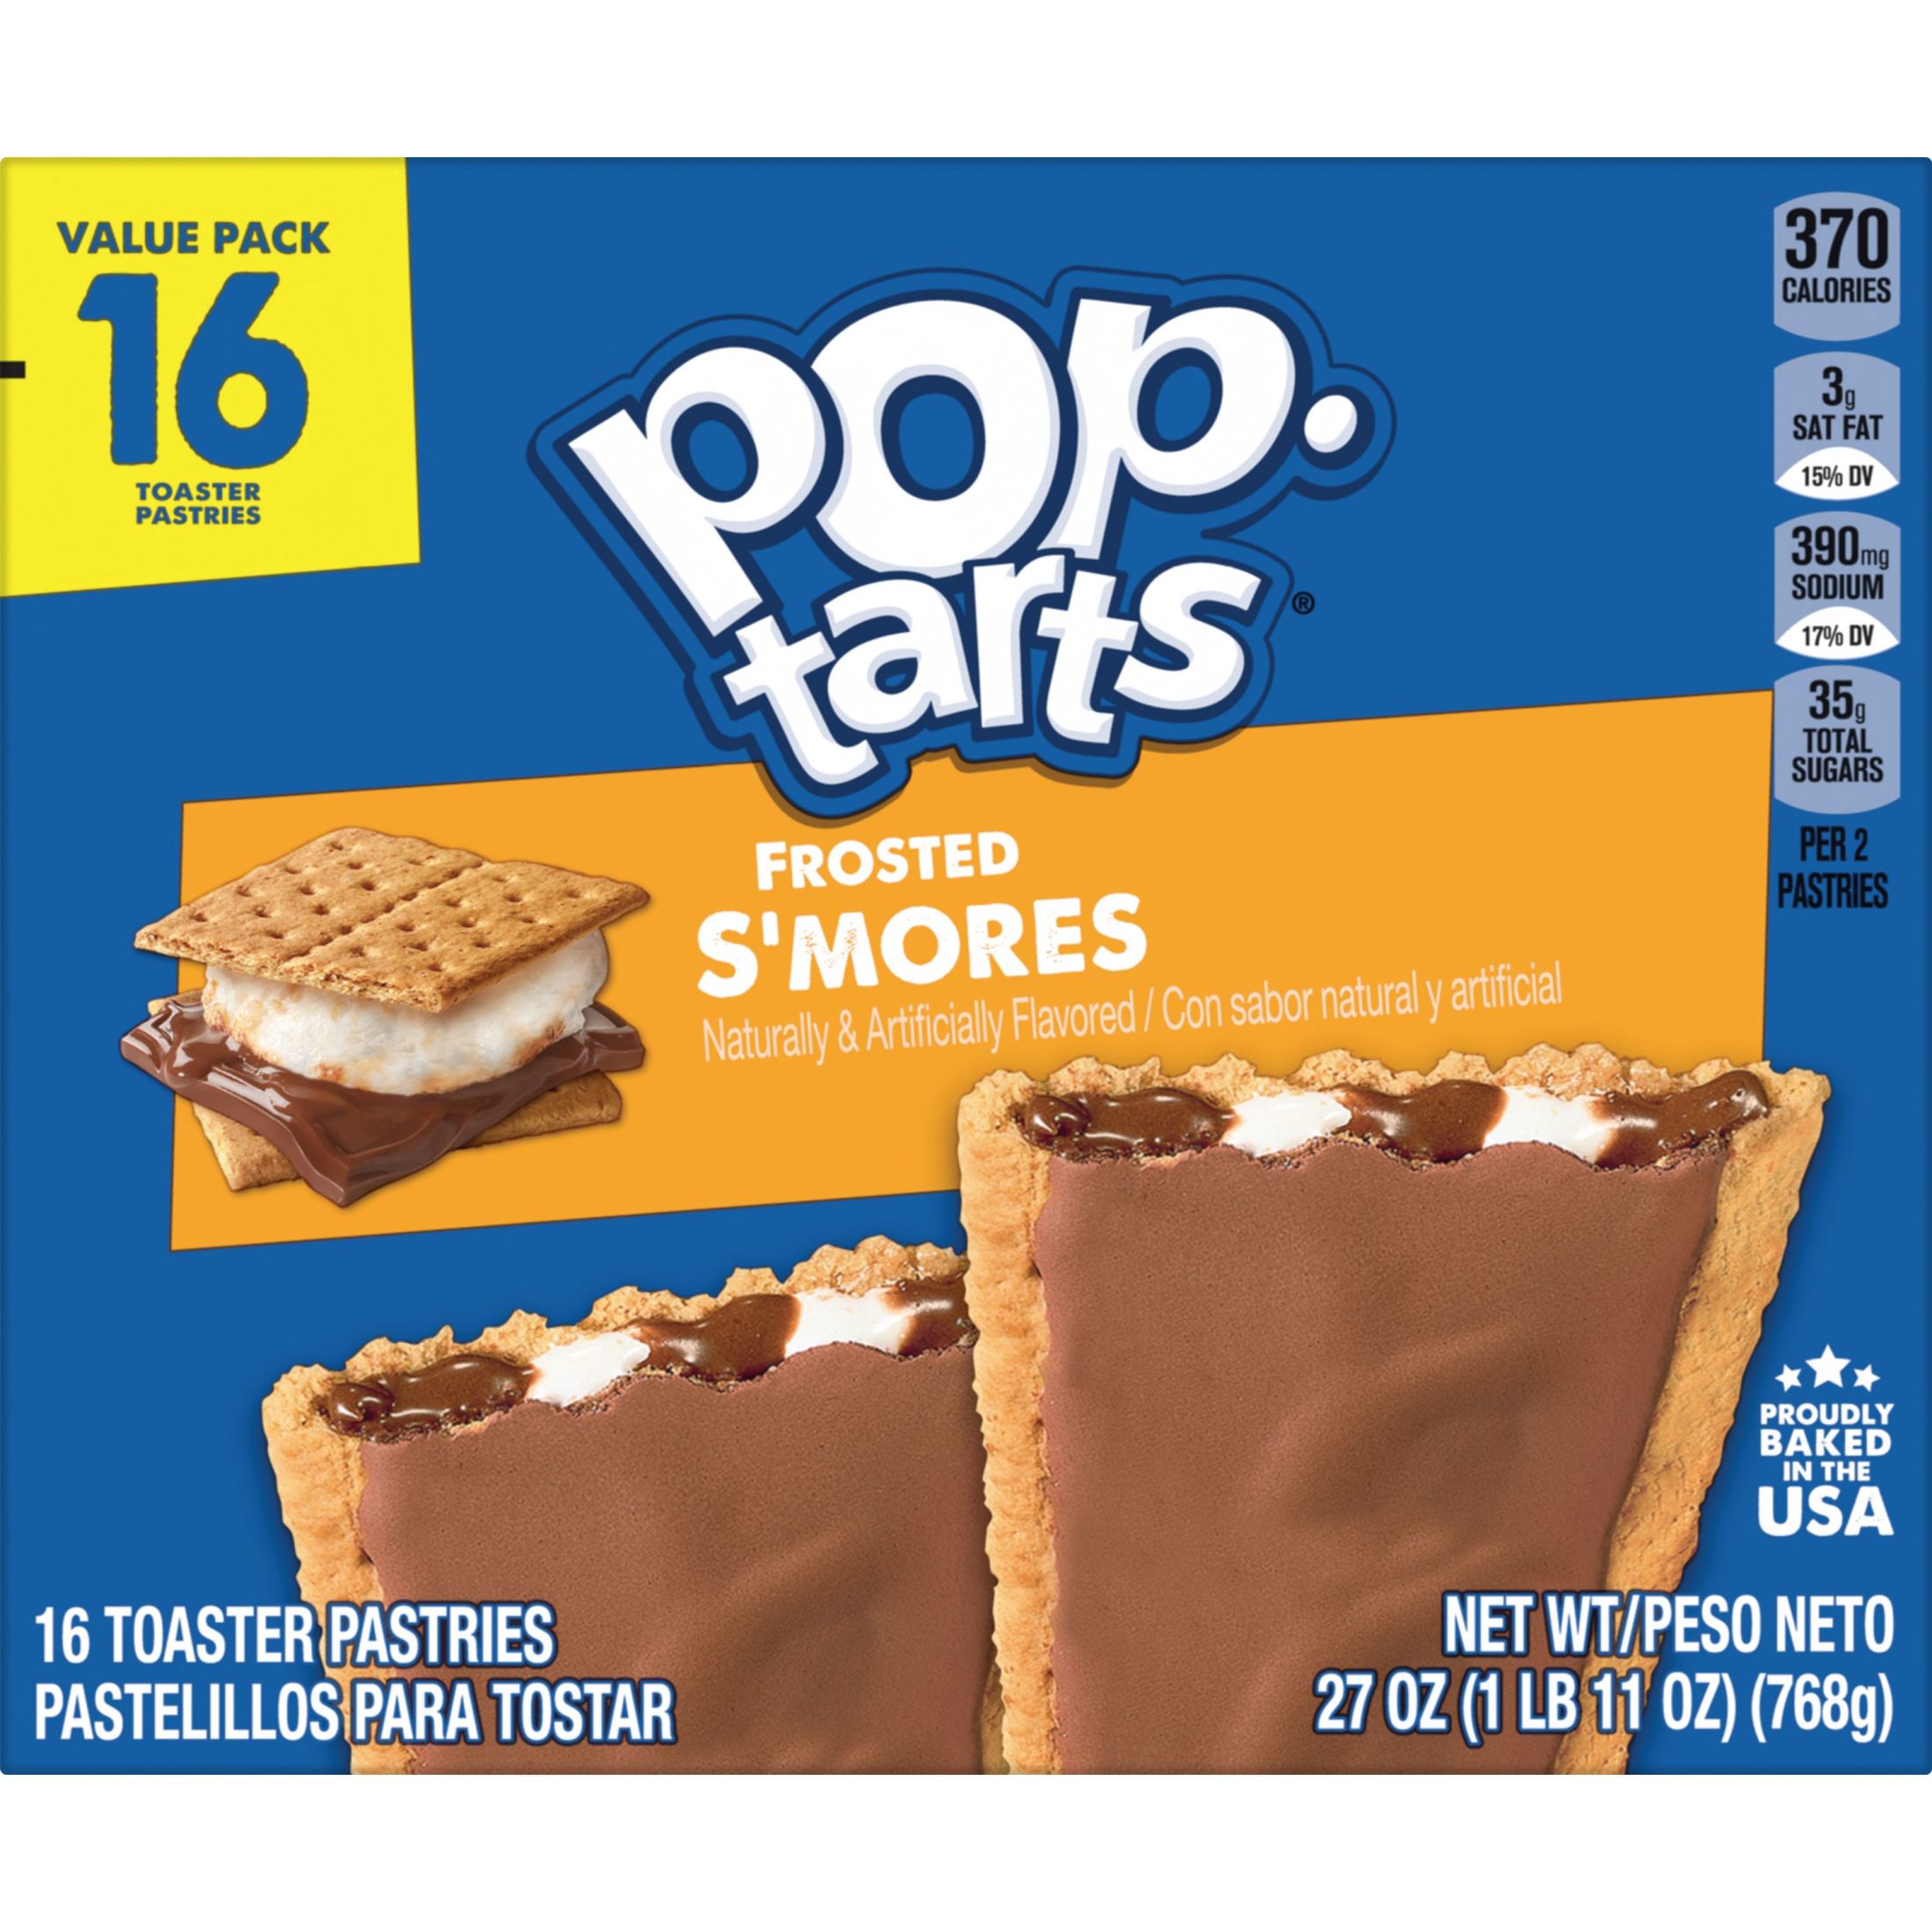 (3 pack) Pop-Tarts Frosted S'mores Toaster Pastries, Shelf-Stable ...